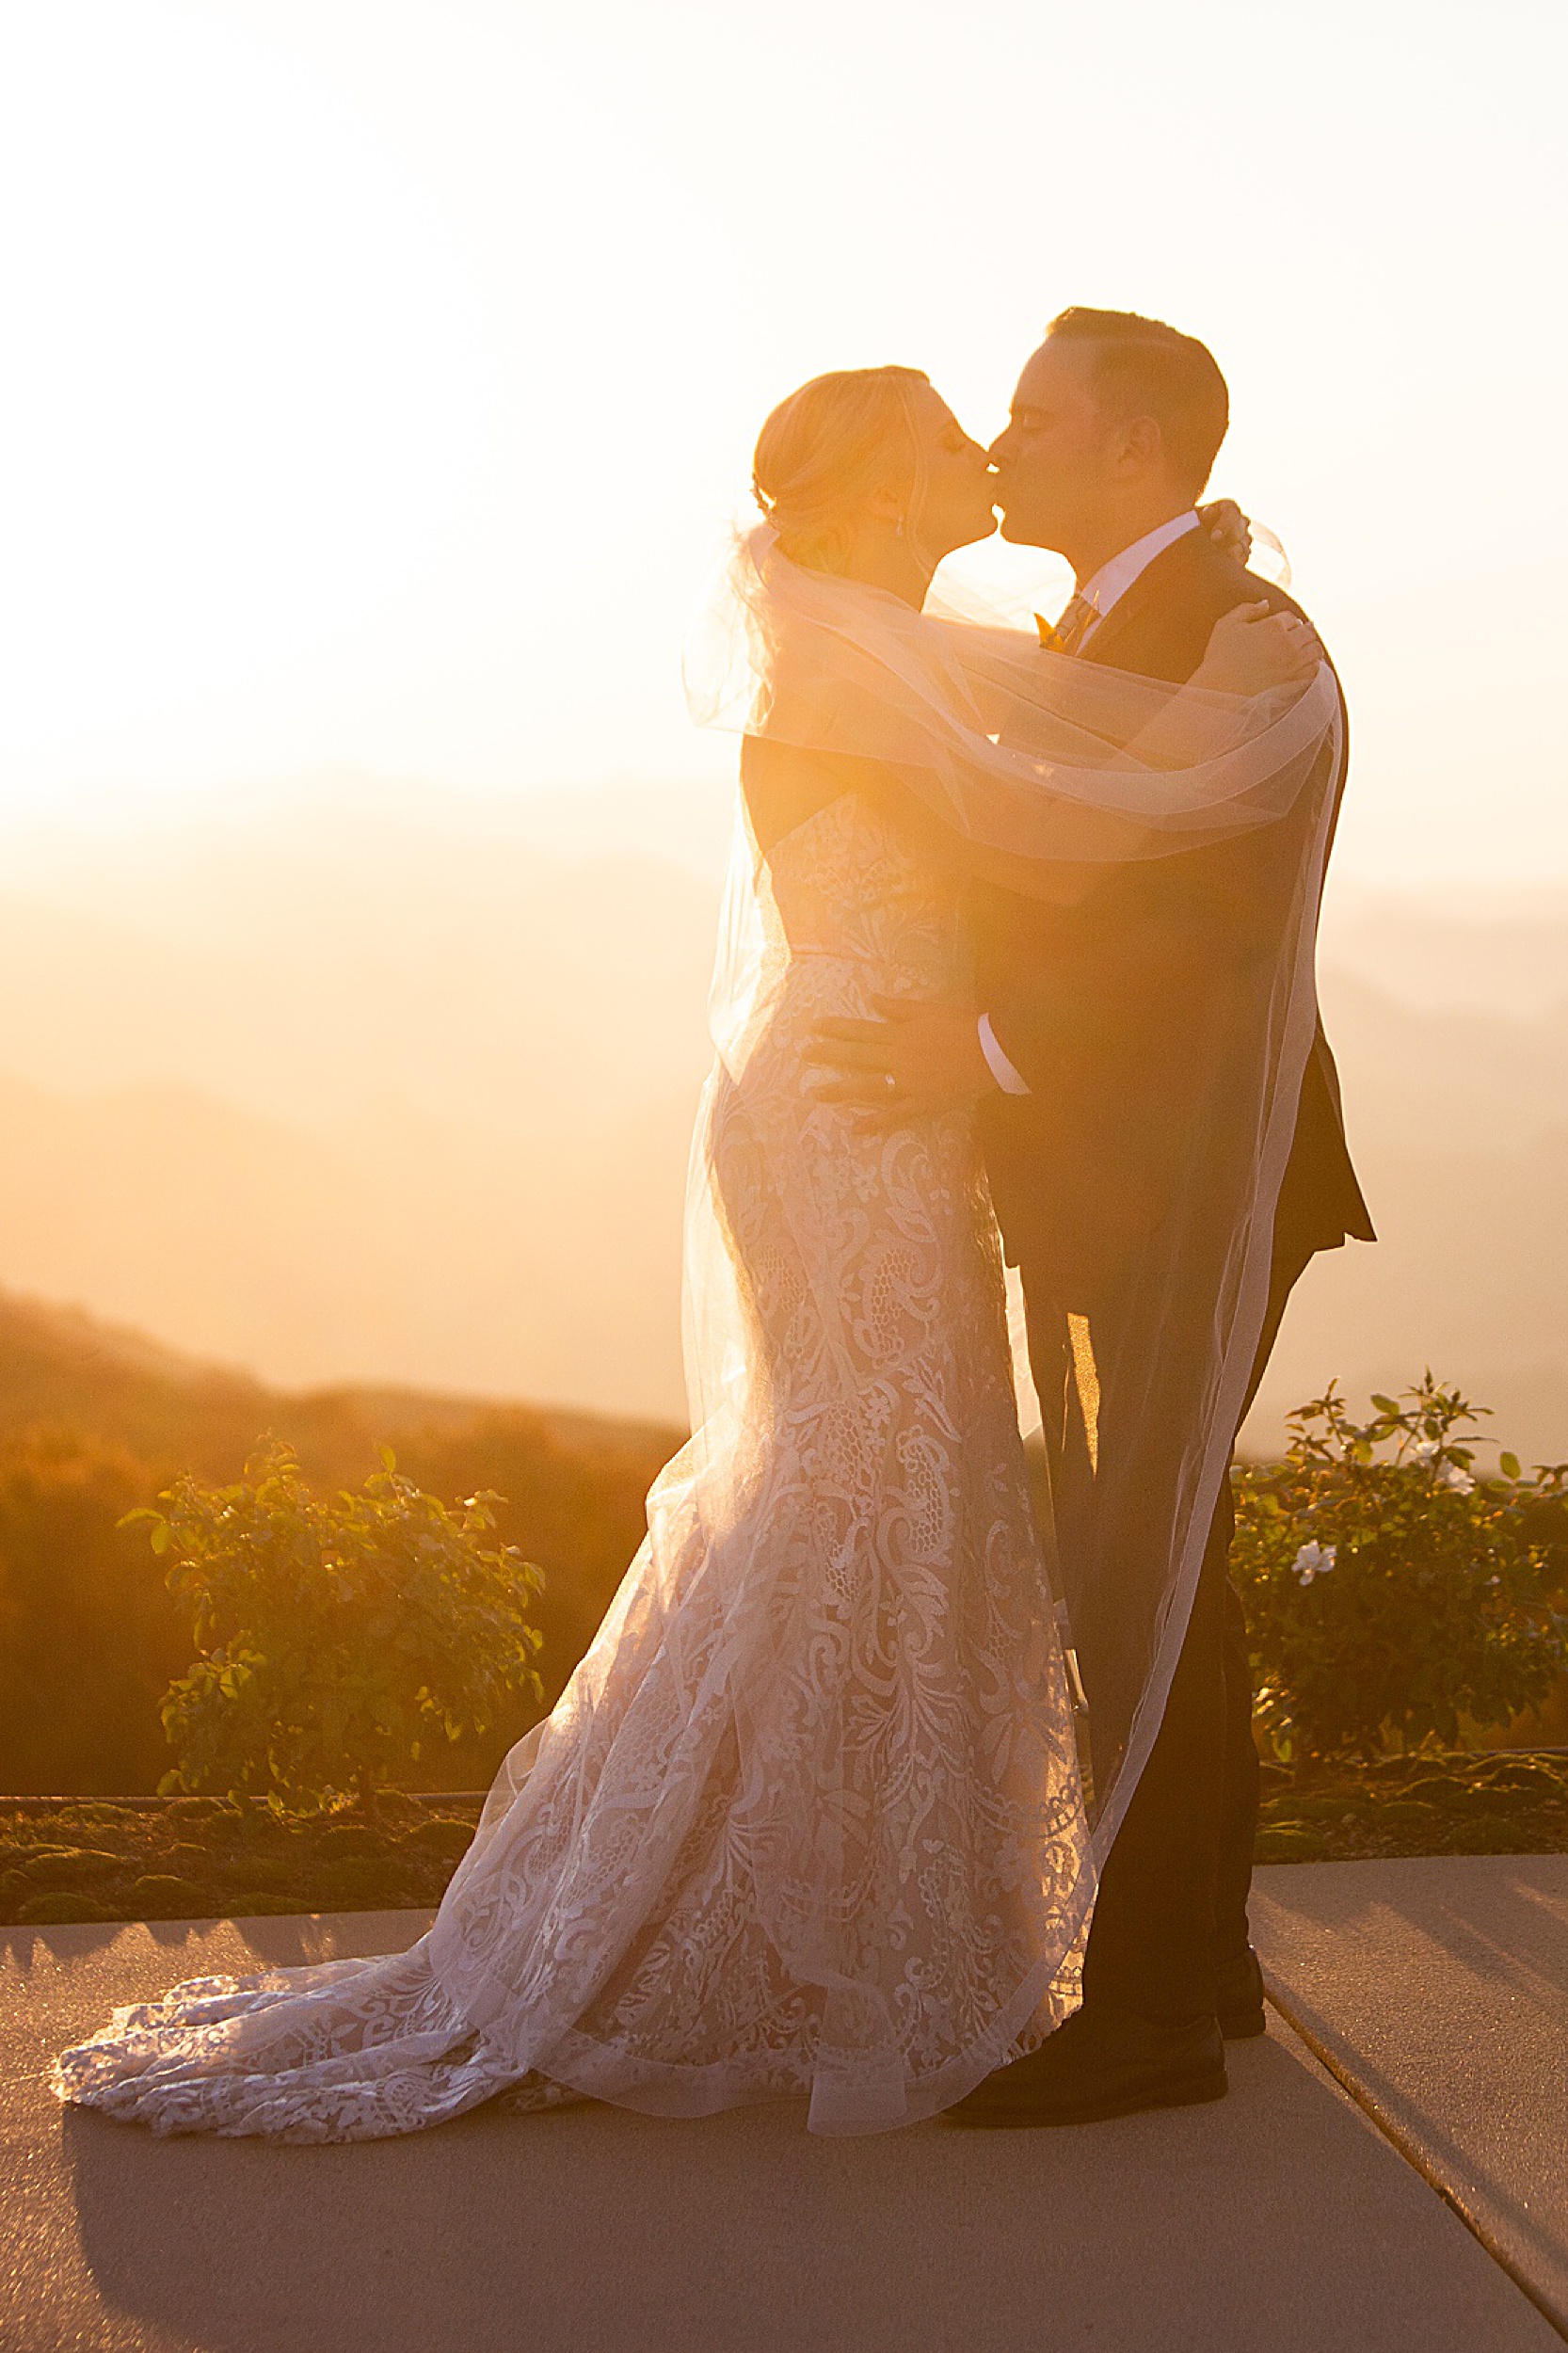 Shelley-and-Bryan-574-1 Best California Elopement Locations in Malibu, By a Los Angeles Elopement Photographer￼